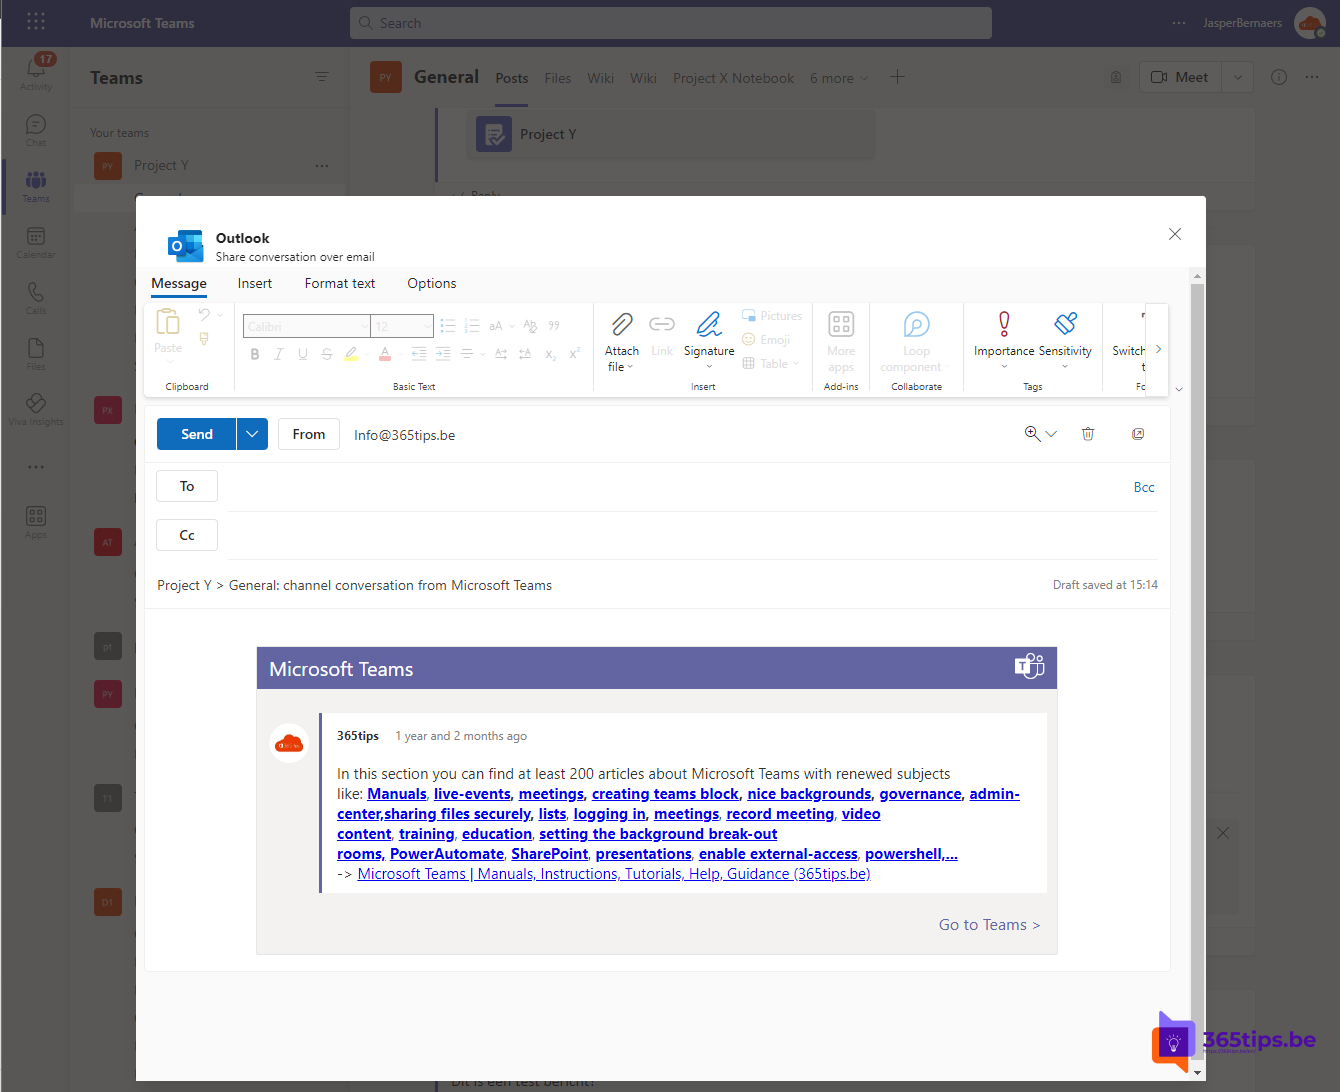 👨🏽‍💻 How can you share Microsoft Teams conversations with non-teams users?